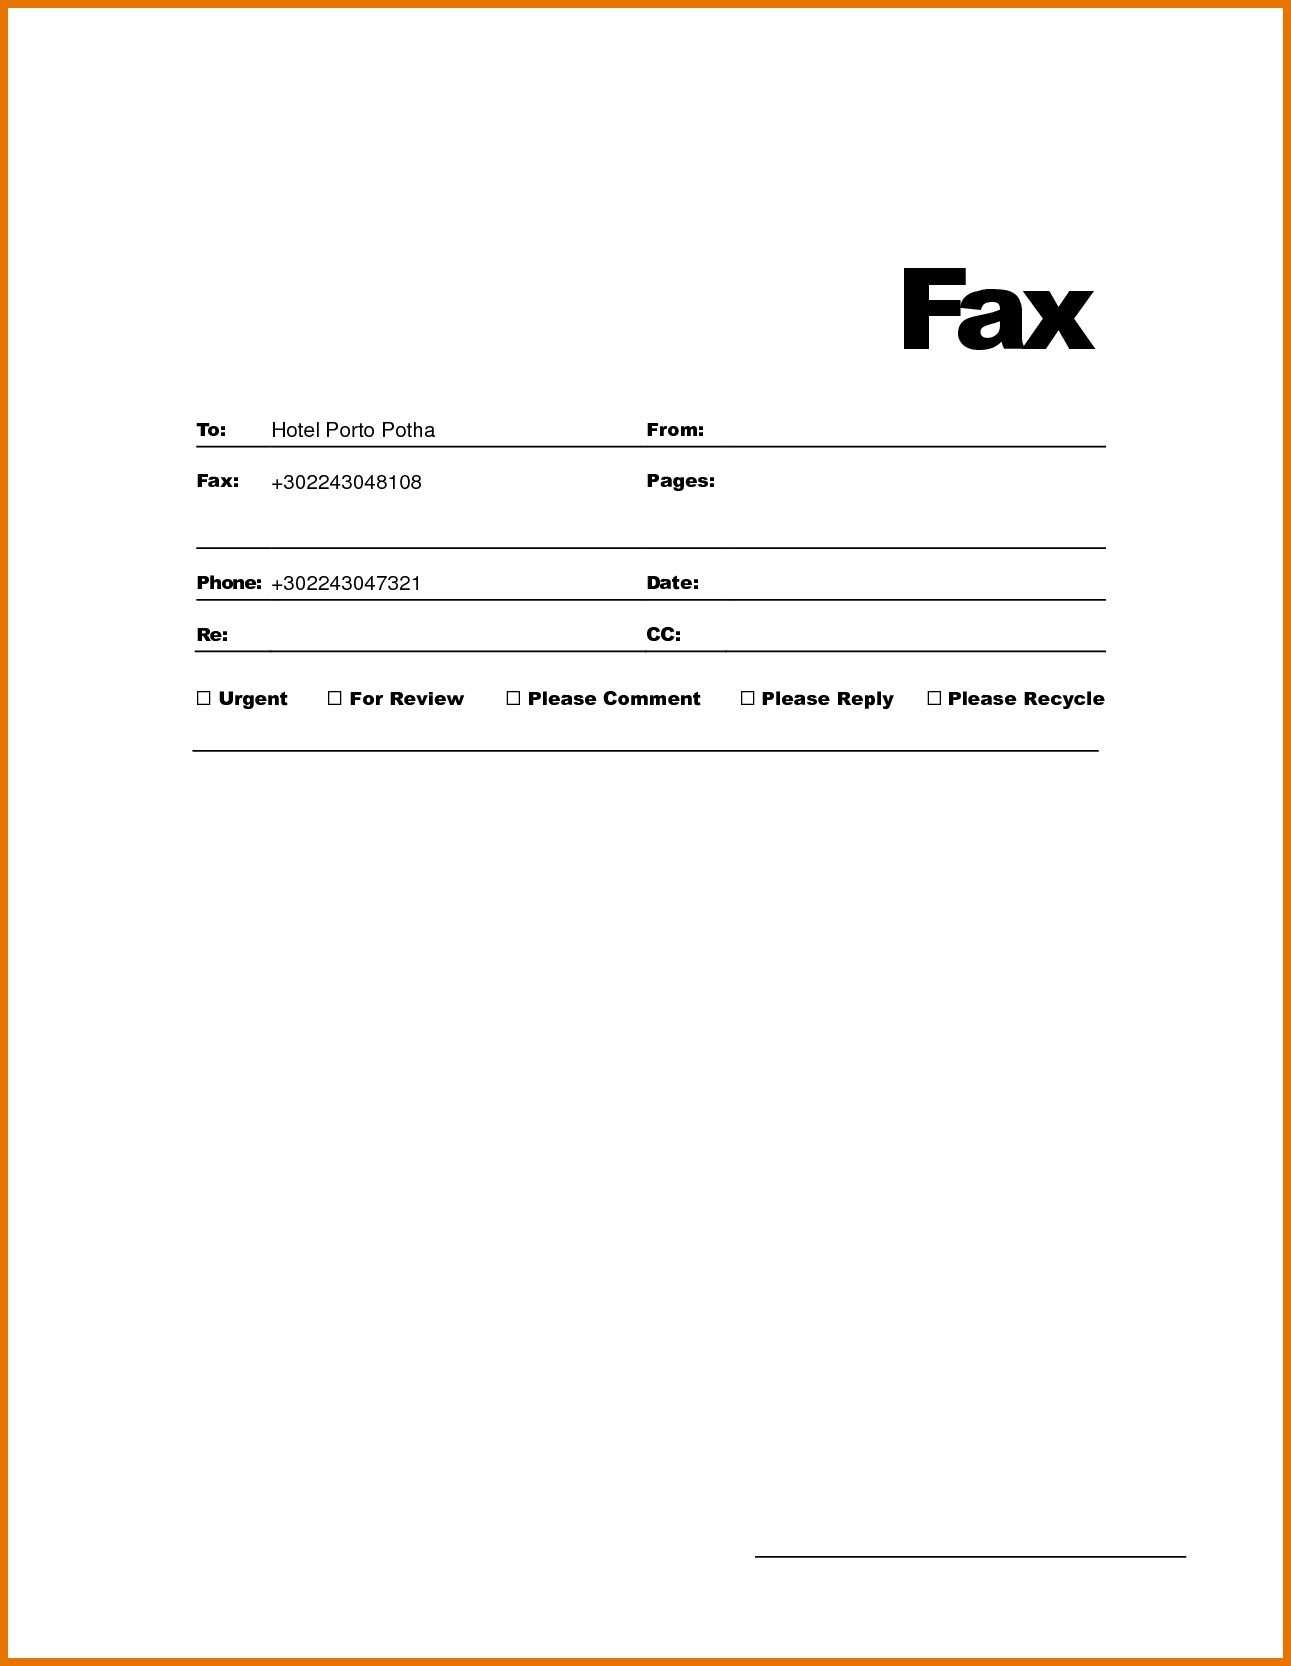 Fax Cover Sheet Microsoft Word 2010 – Raptor.redmini.co With Fax Cover Sheet Template Word 2010